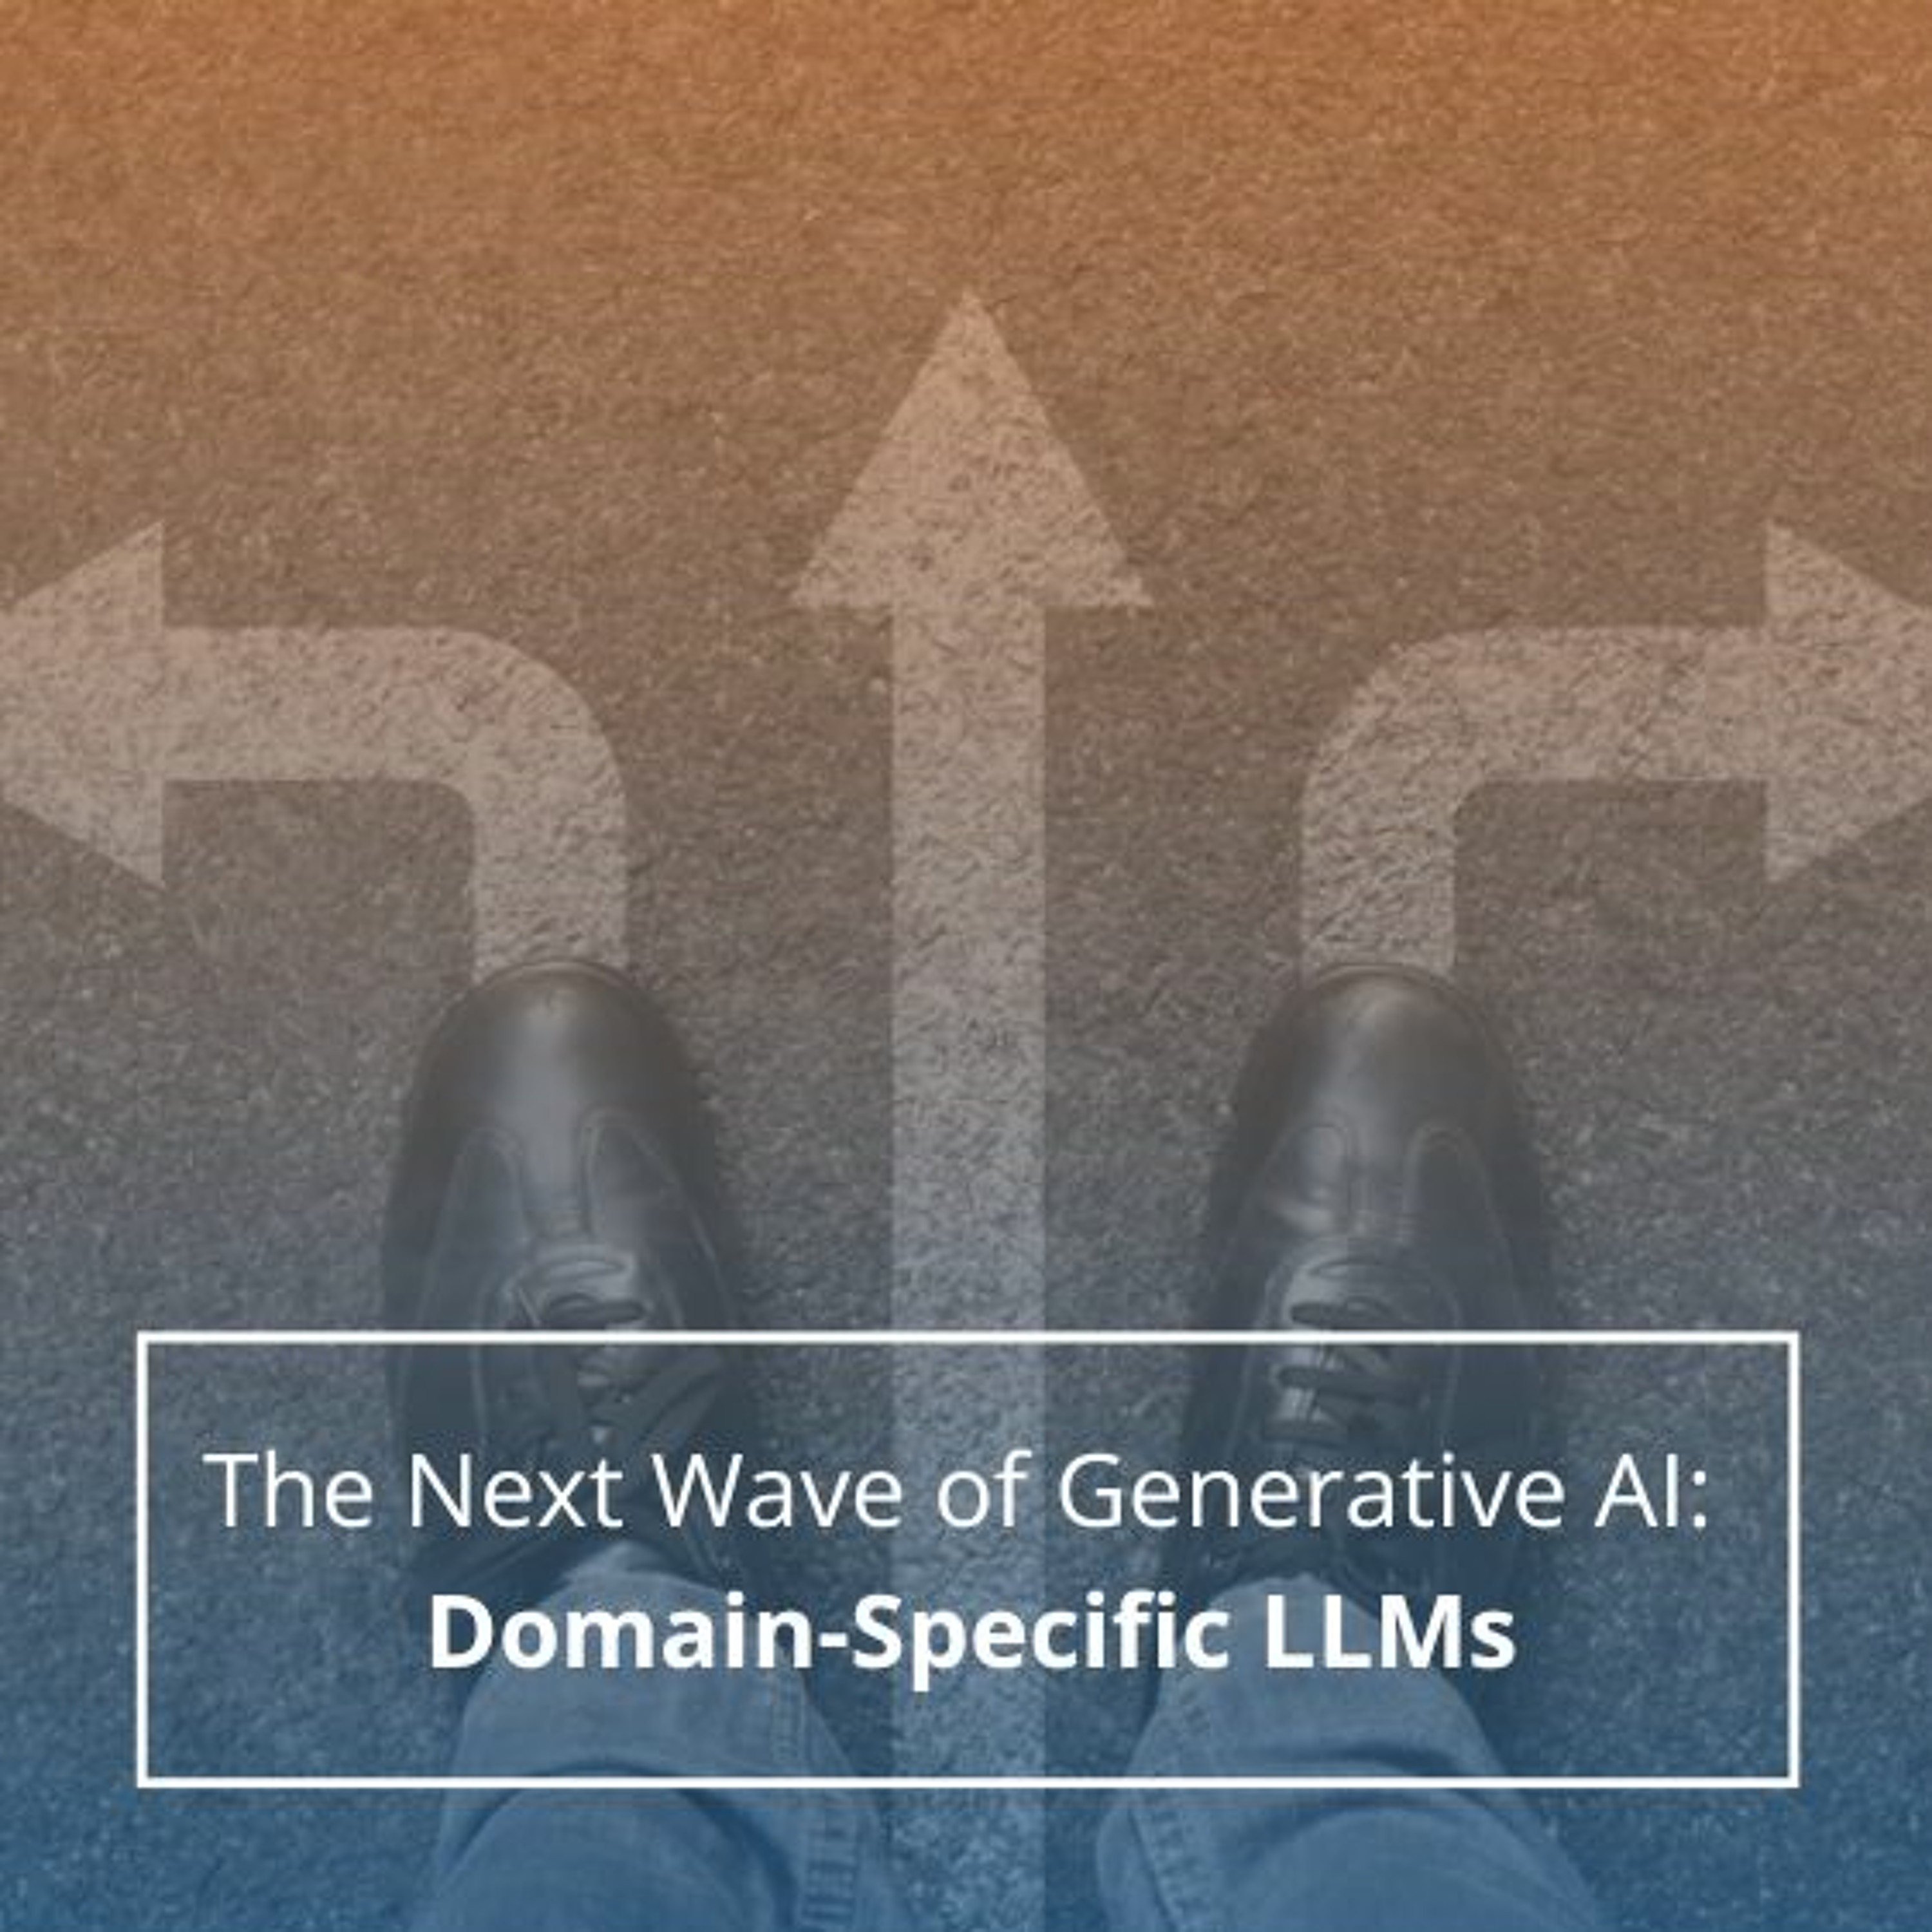 The Next Wave of Generative AI: Domain-Specific LLMs - Audio Blog